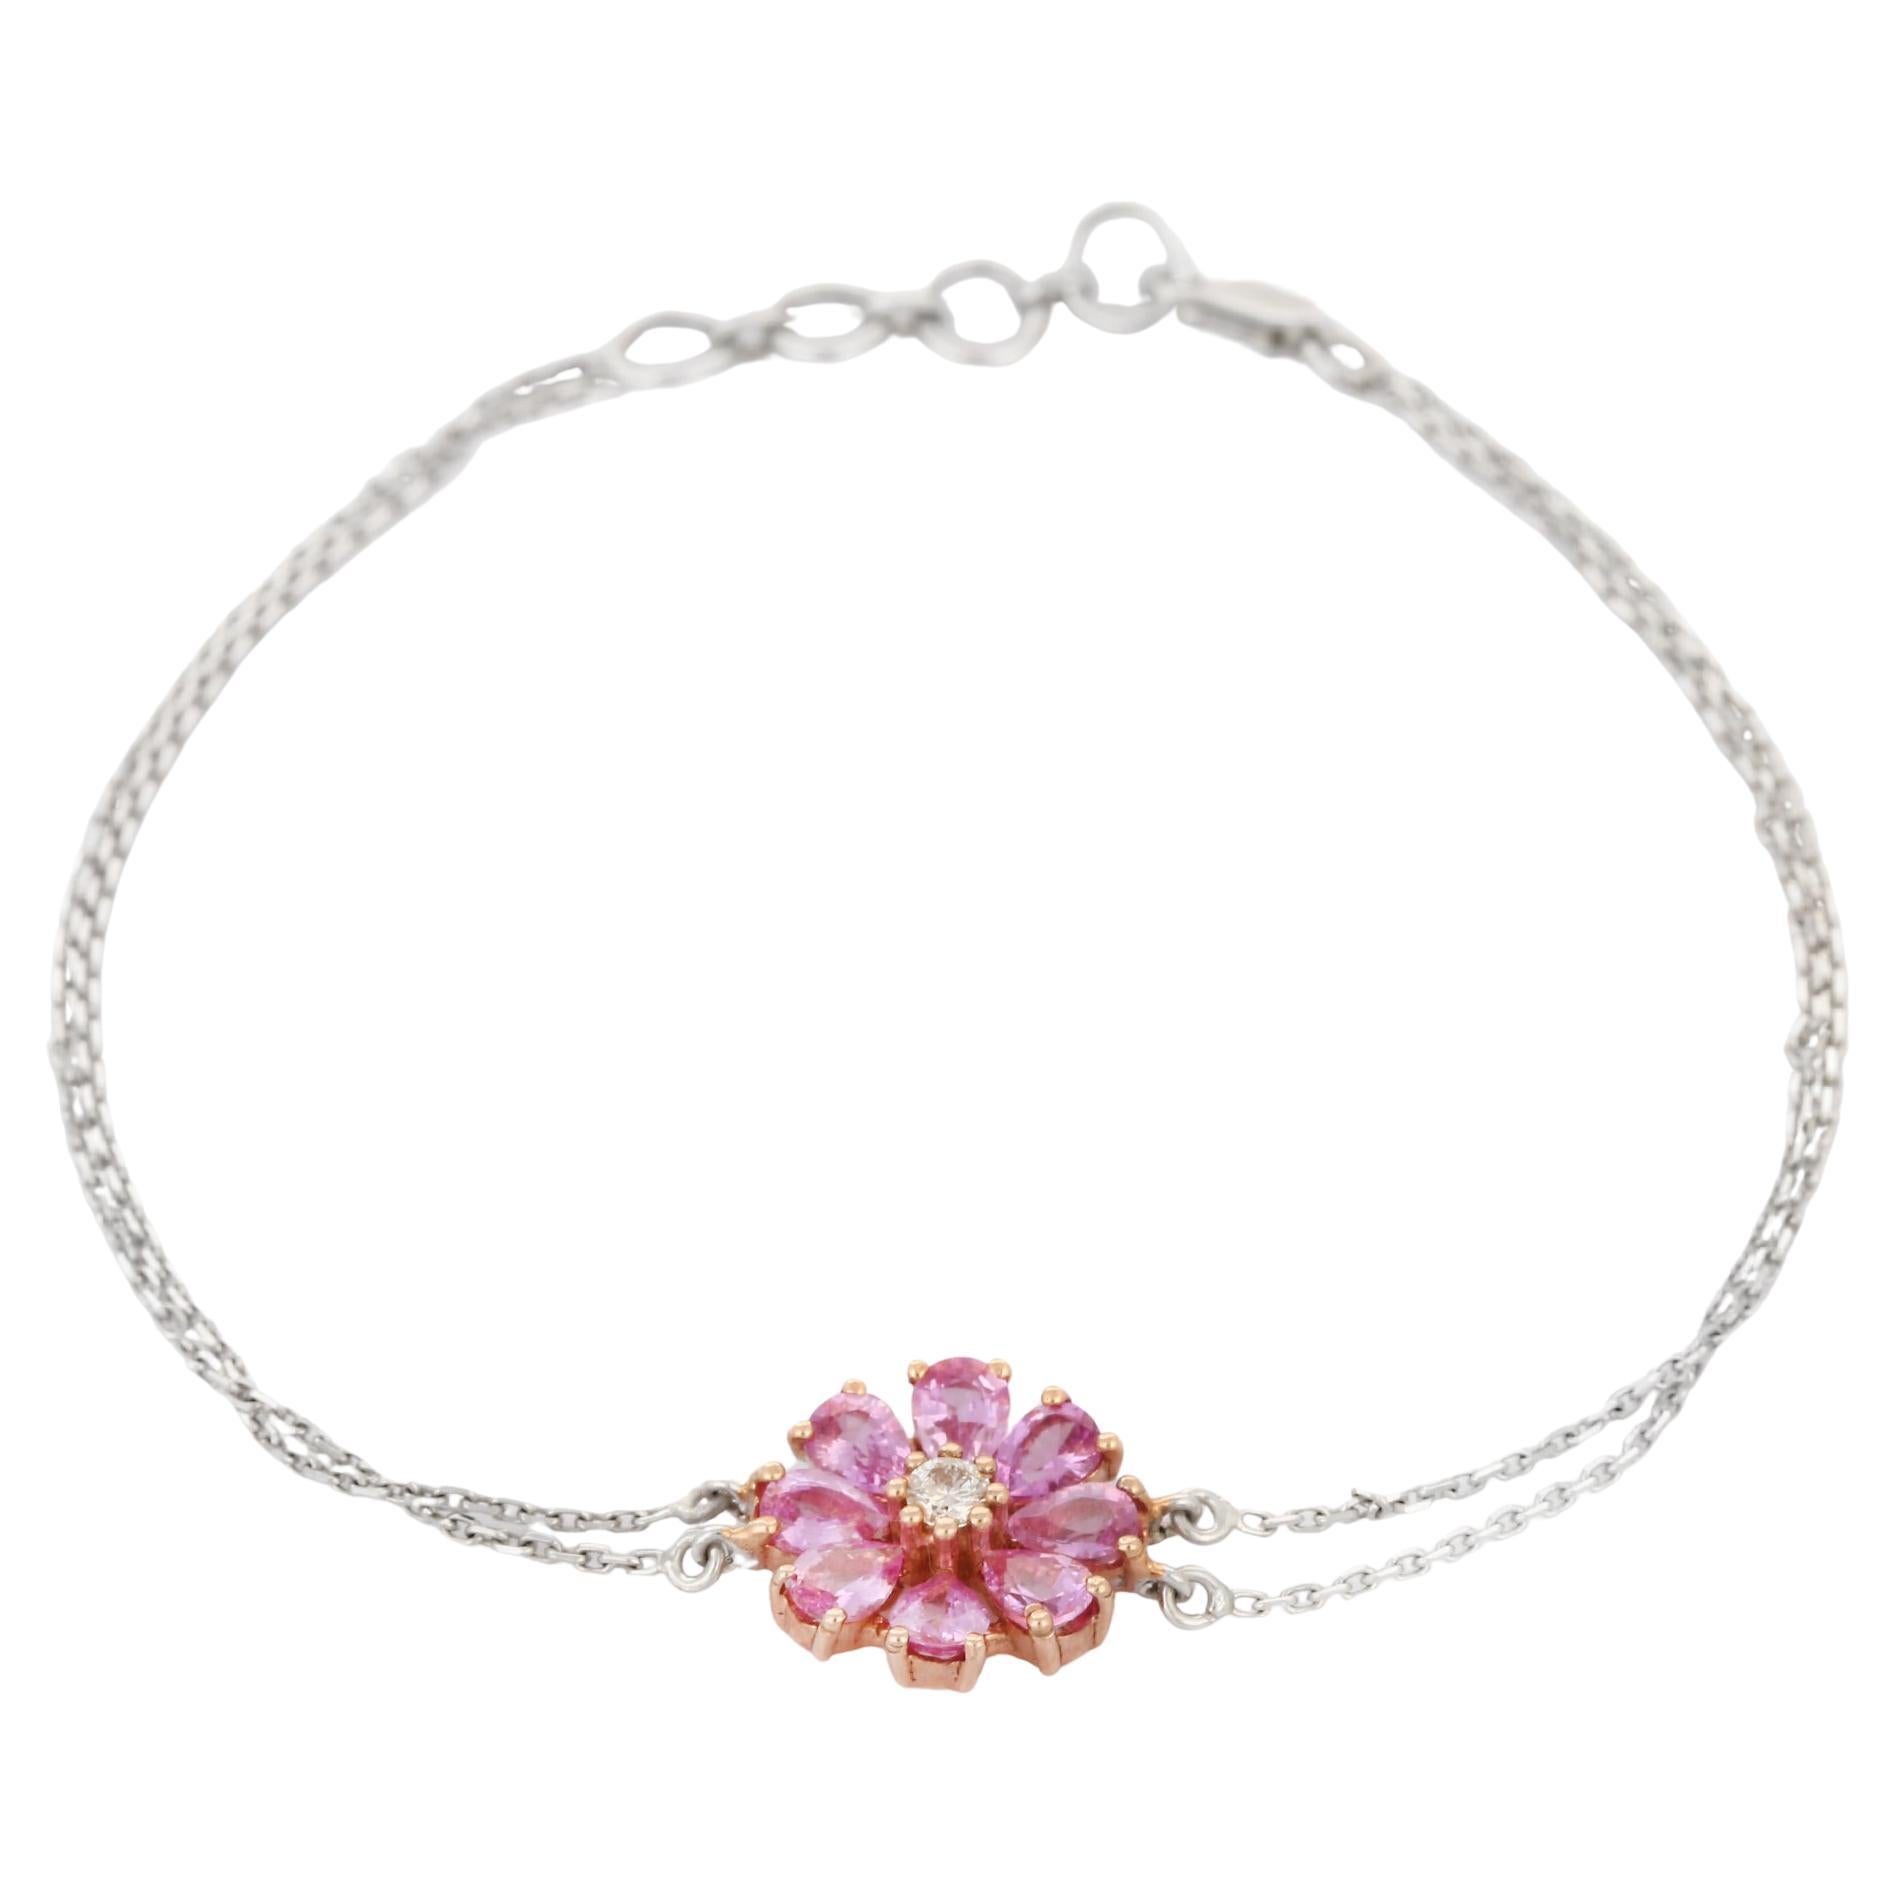 Magnificent 1.36 Ct Pink Sapphire Flower Diamond Bracelet in 18K White Gold For Sale